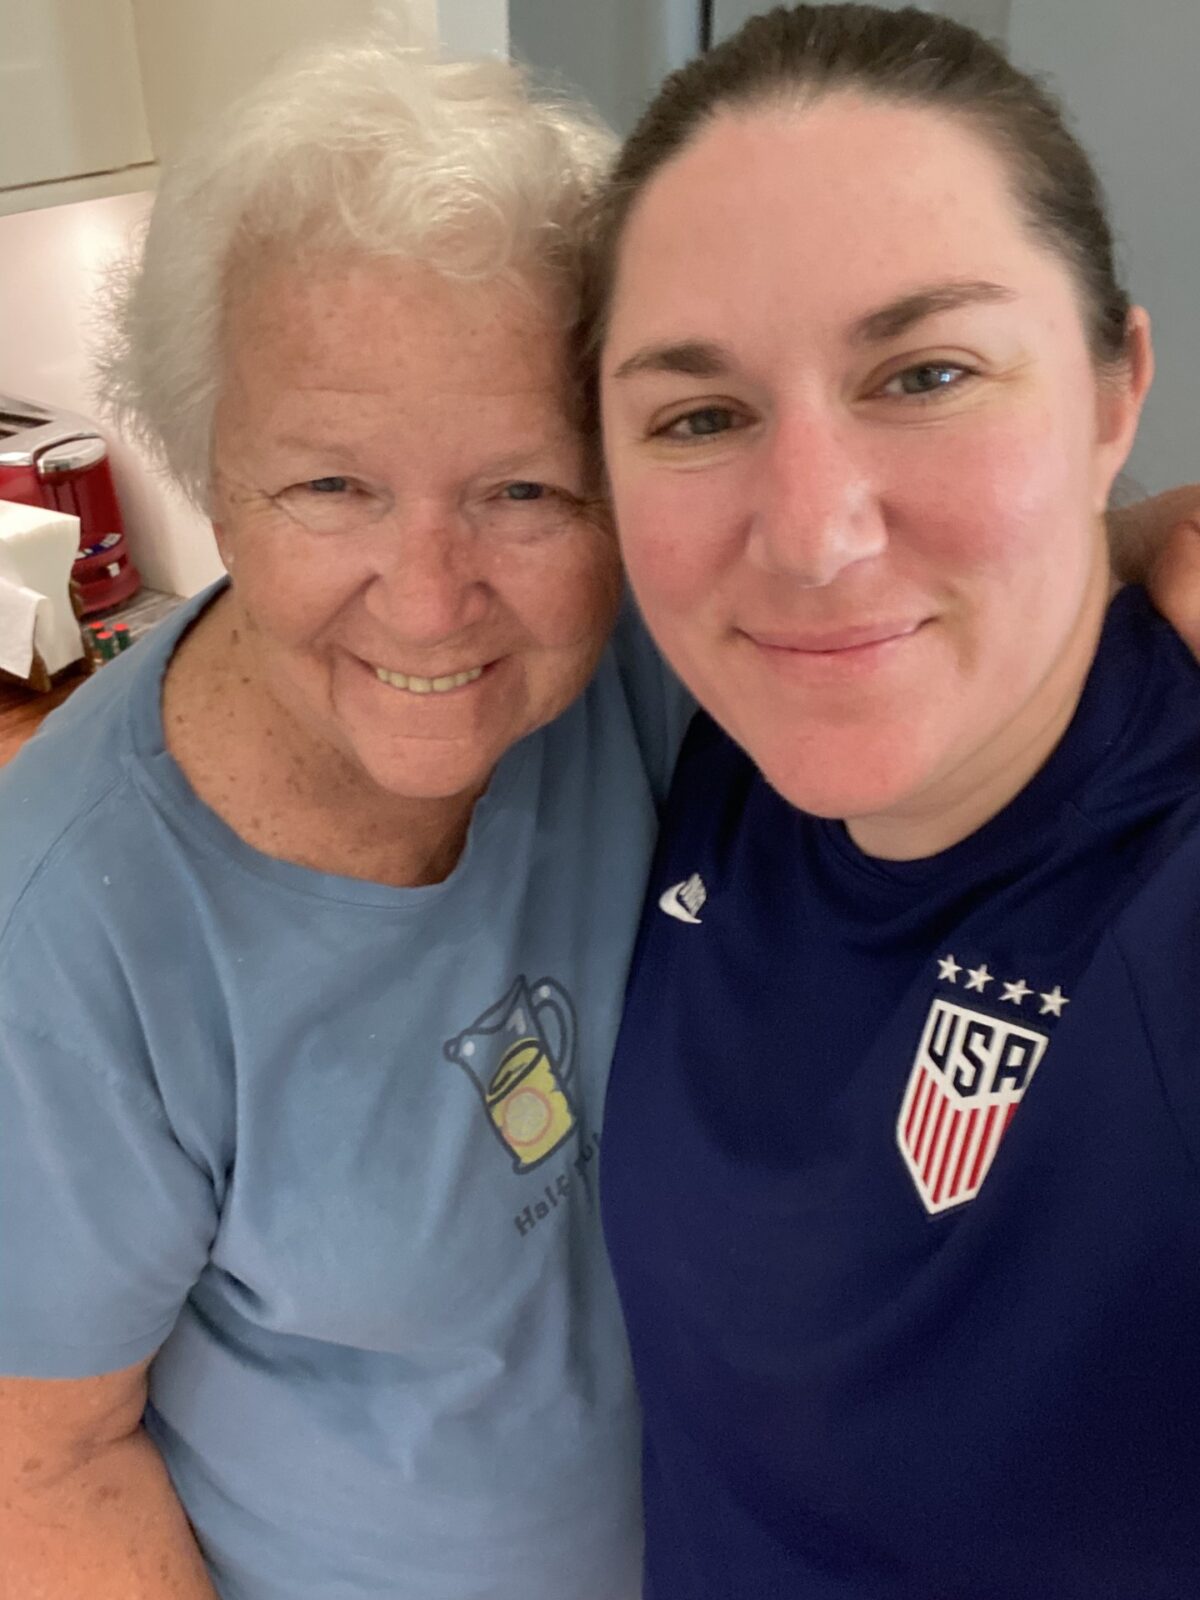 Caitlin with her mom, Virginia. Caitlin learned, years after the fact, that Virginia battled colorectal cancer while Caitlin was still in middle school. Now she's sharing her family story.